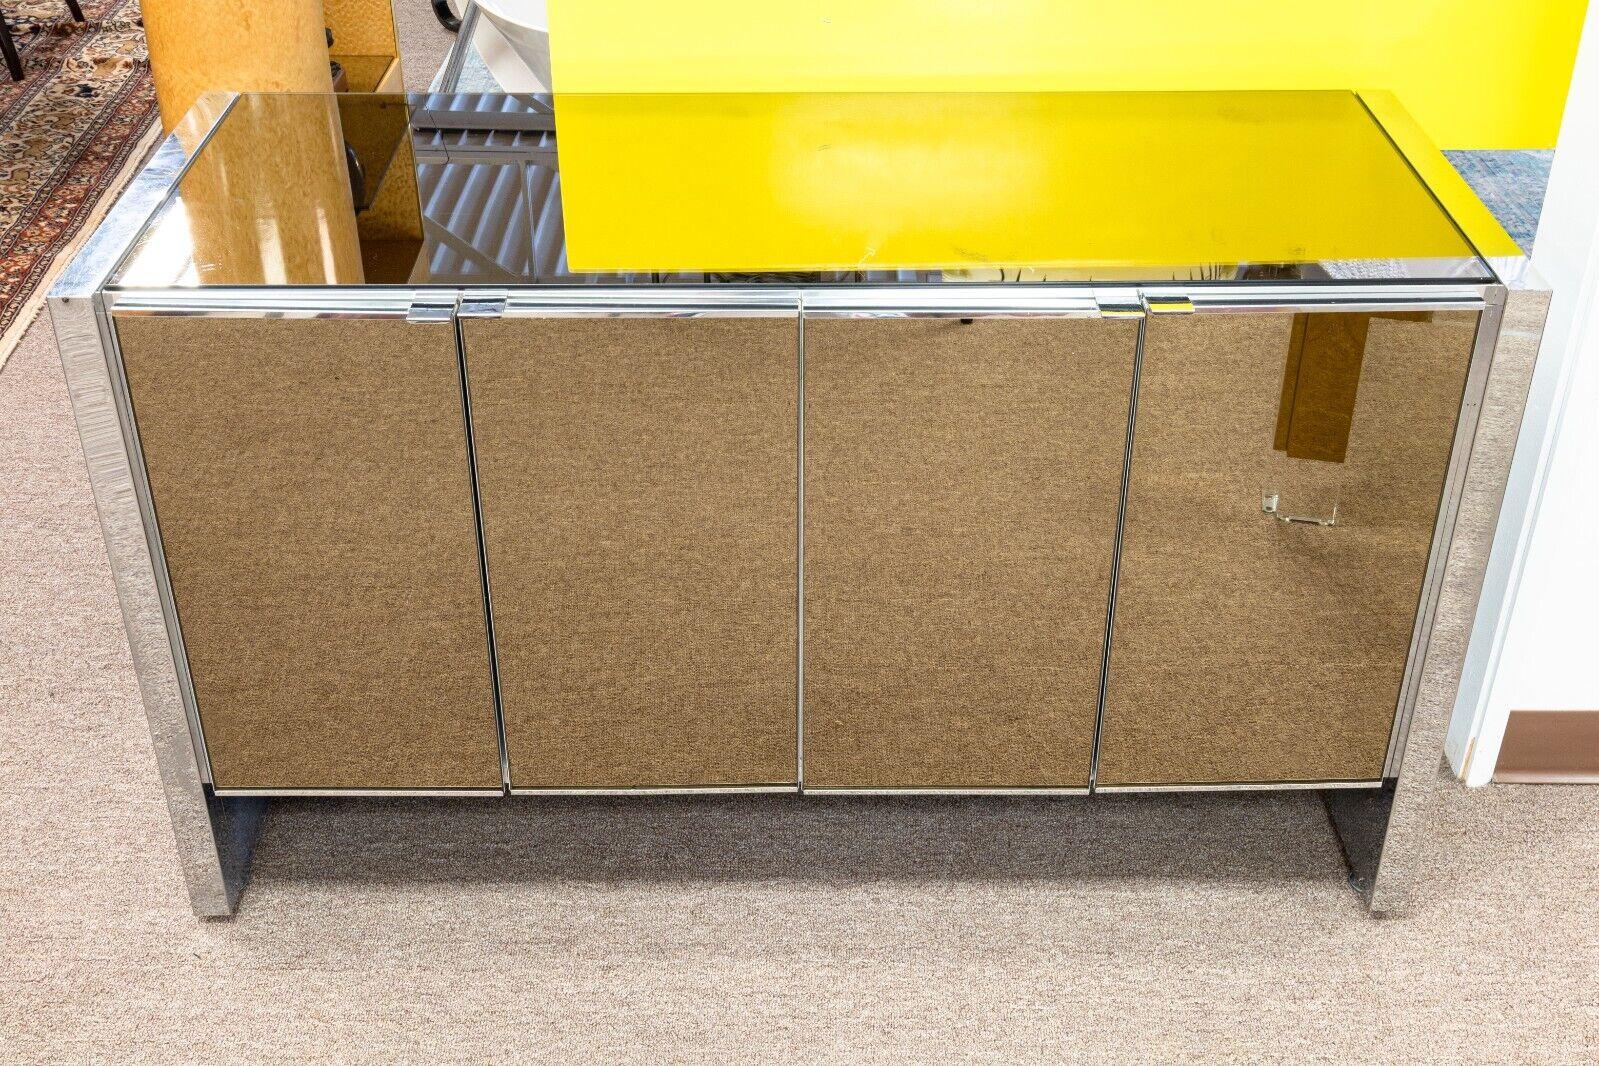 An Ello mirrored chrome credenza. This lovely credenza features a very lovely mirrored design, with mirrors wrapping around the front, sides, and top of this piece. Aside from this, there is also chrome detailing throughout the piece. This credenza